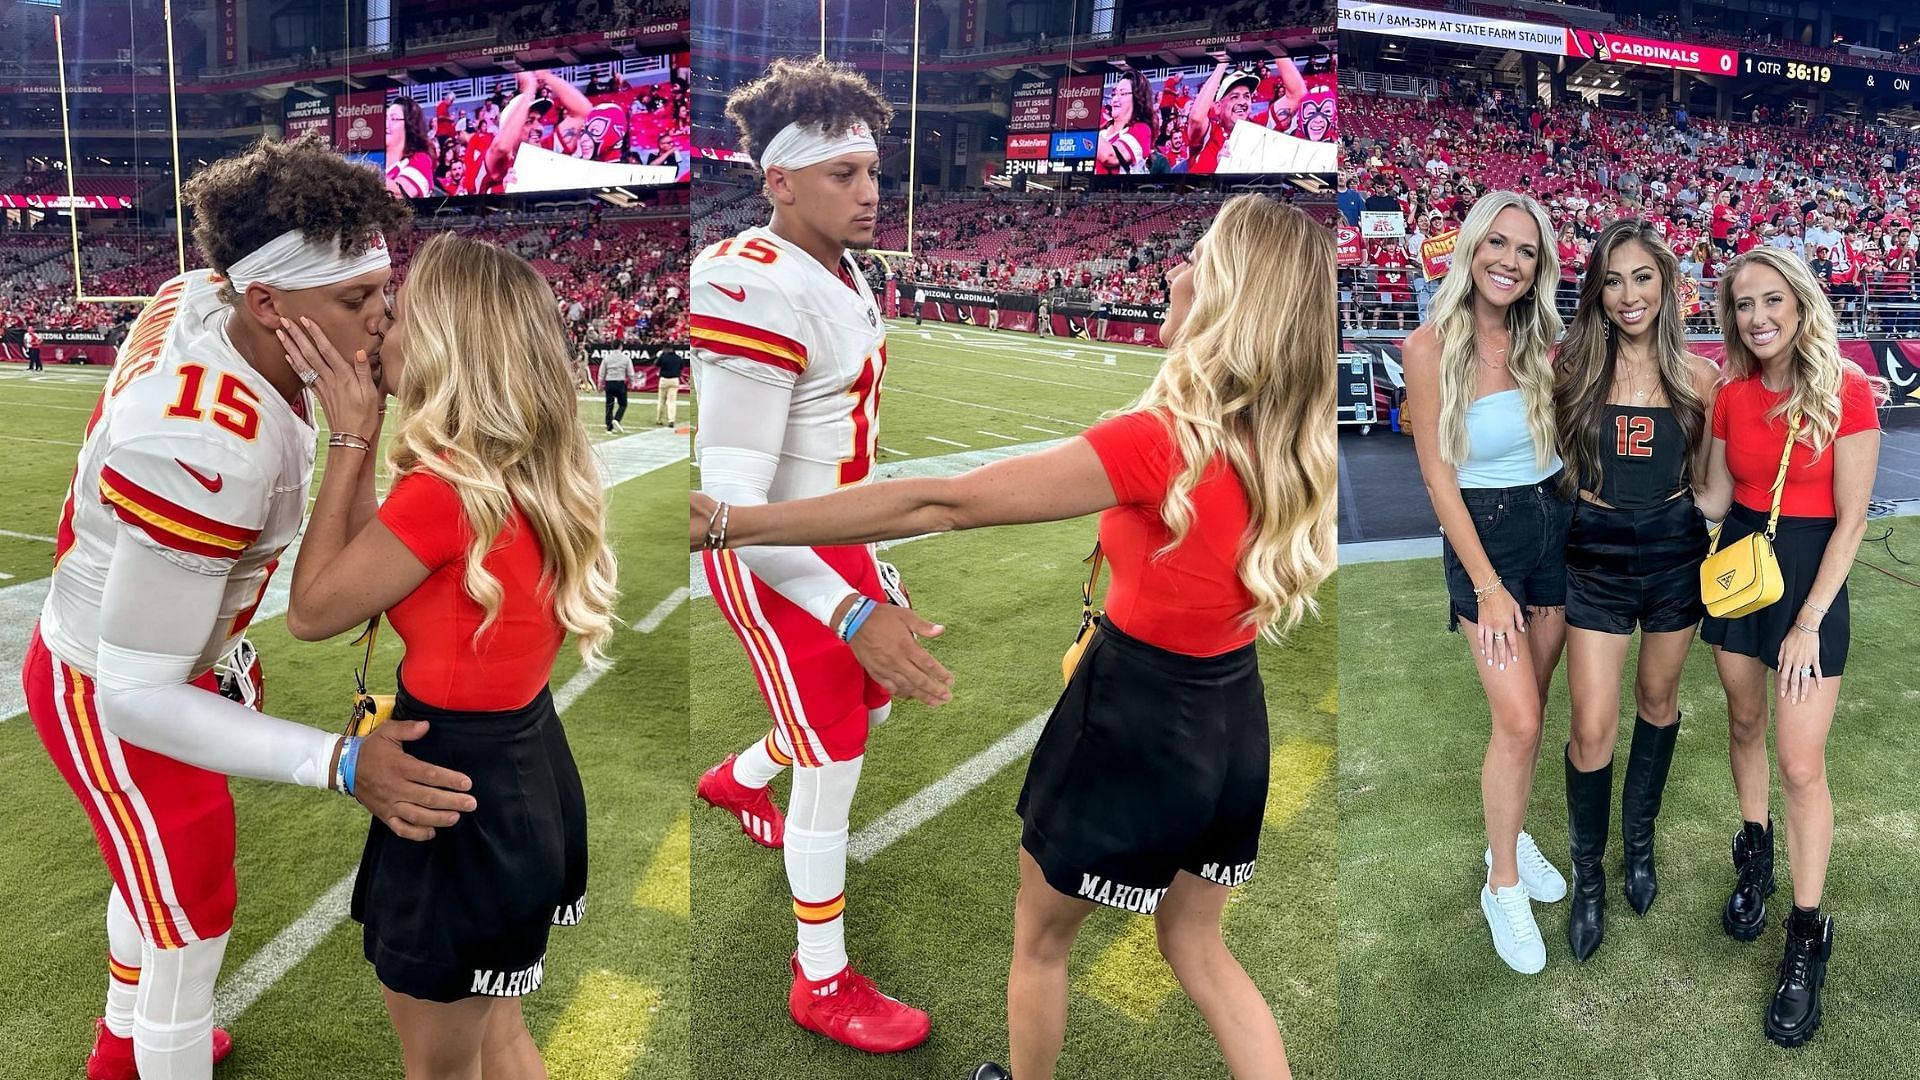 Image Credit: Brittany Mahomes&#039; Instagram Post